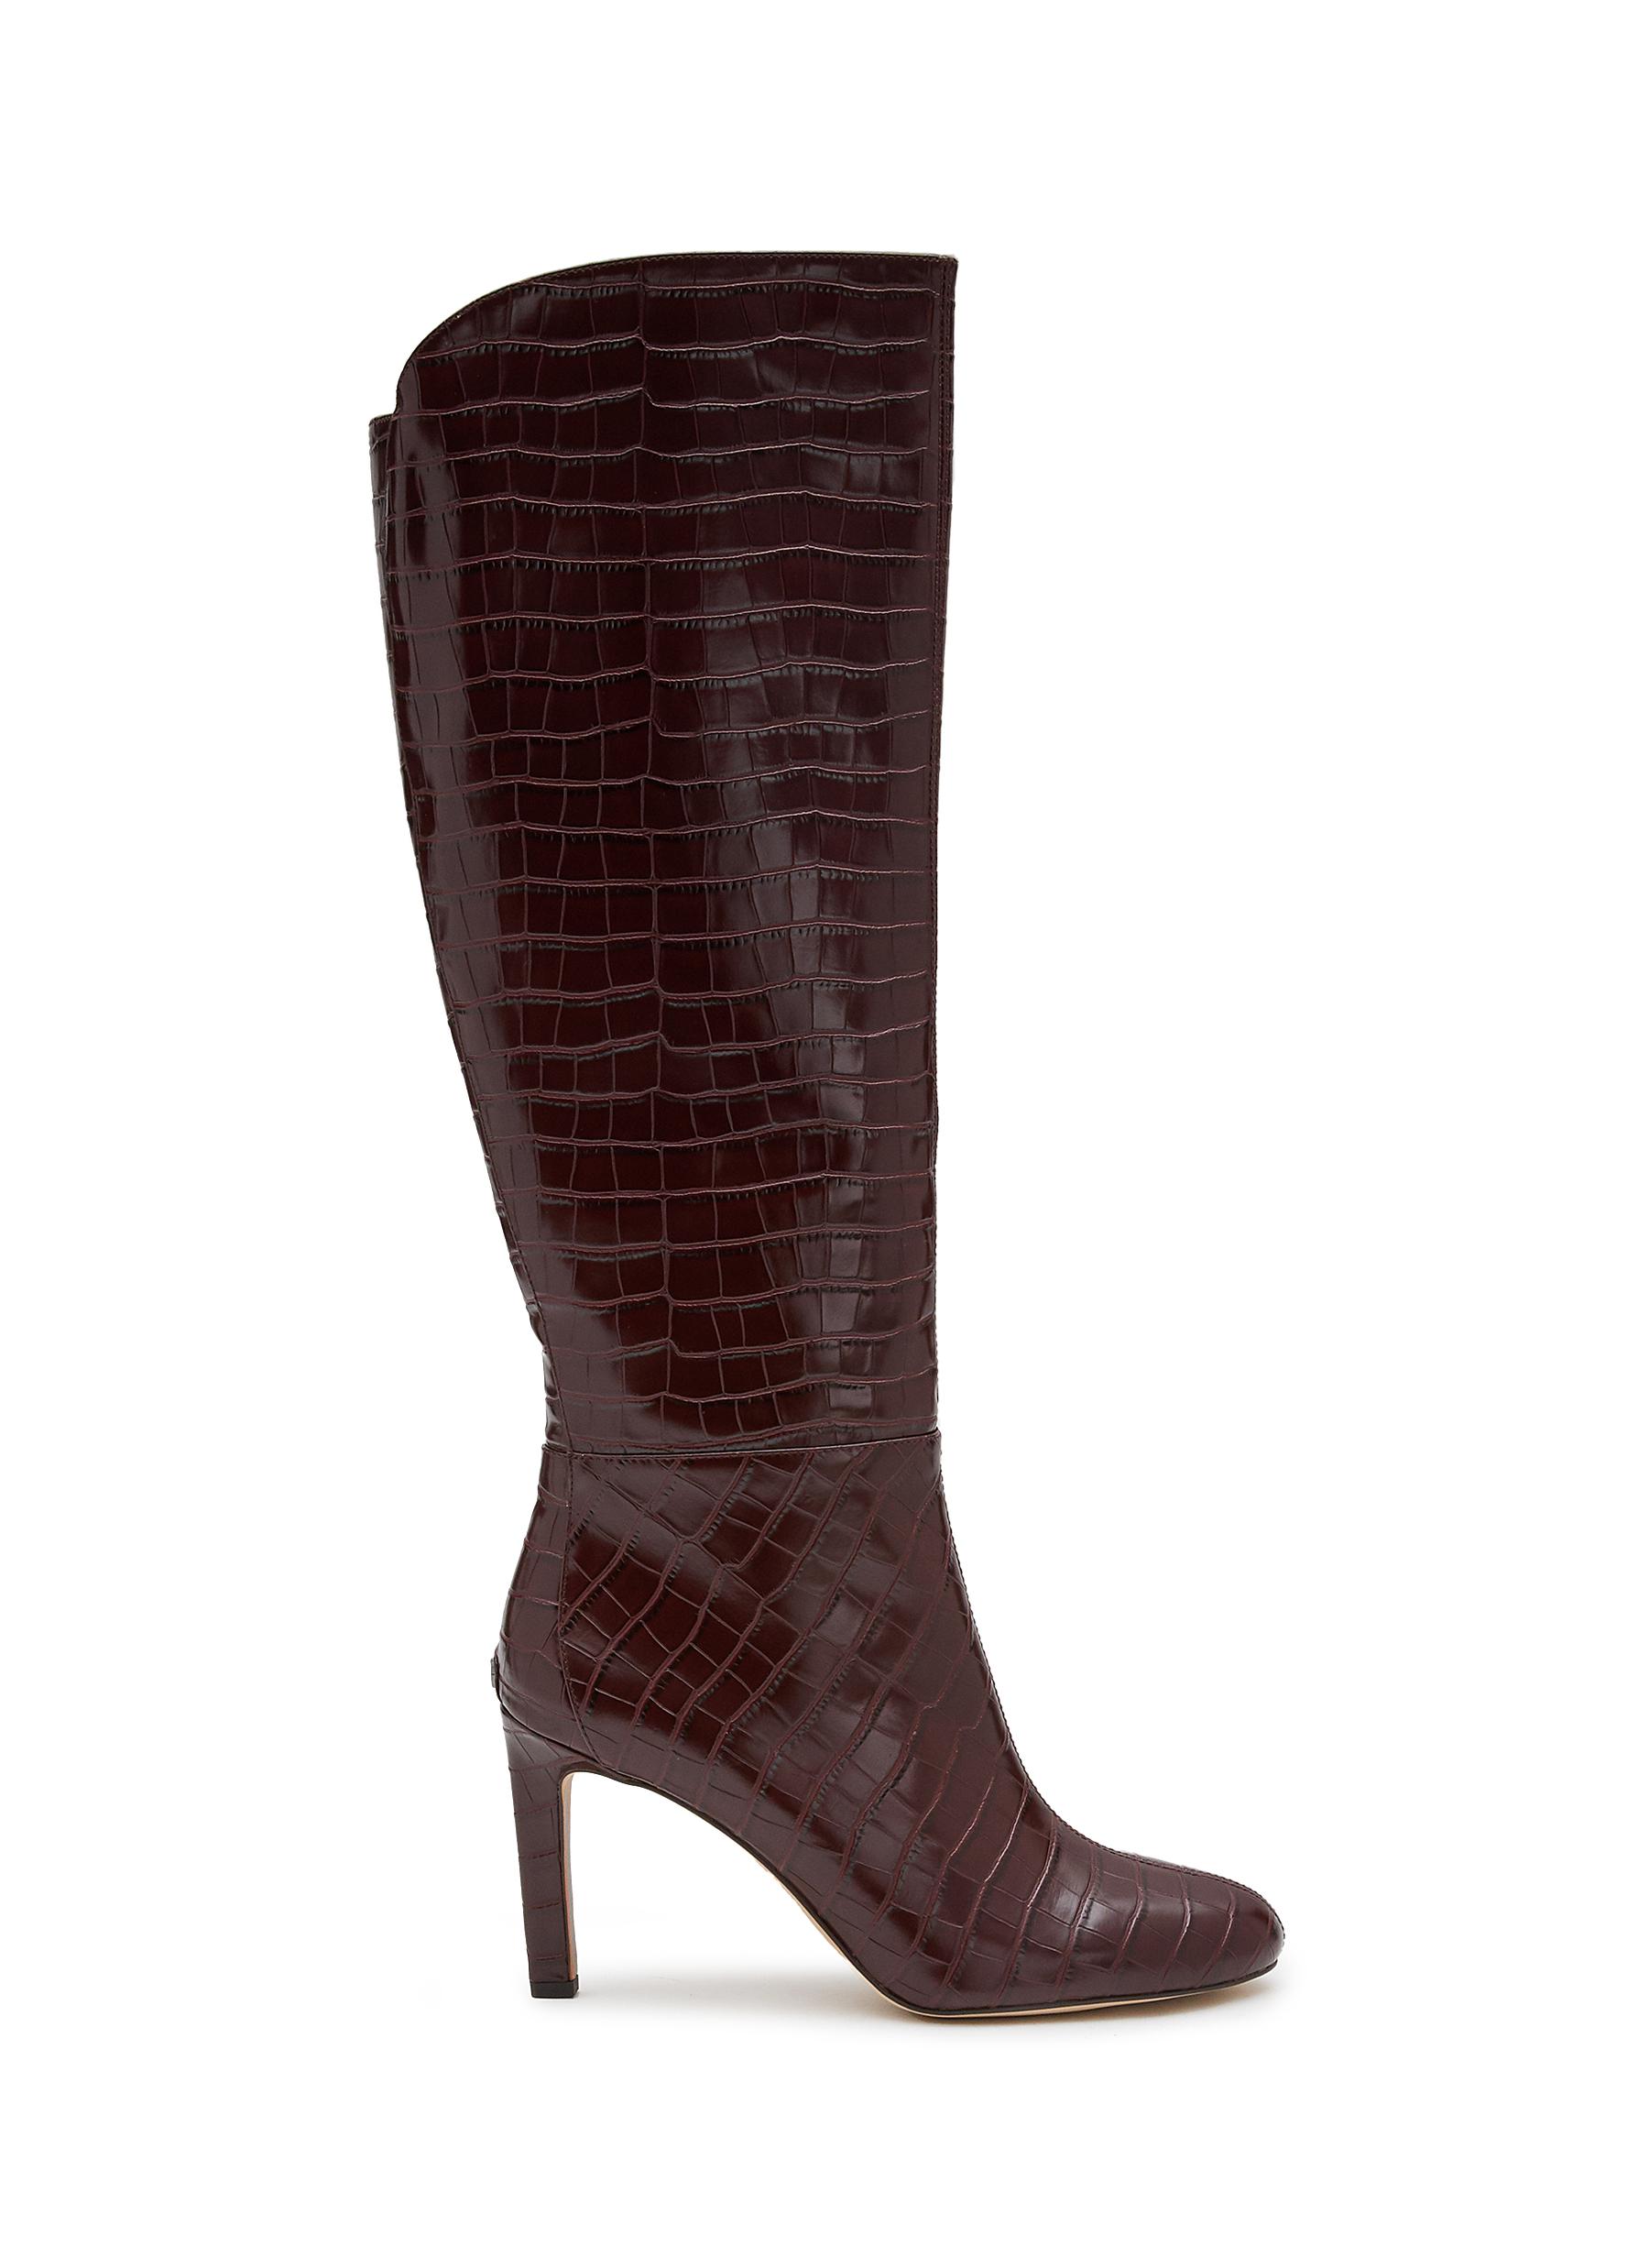 Shauna 80 Embossed Leather Heeled Boots